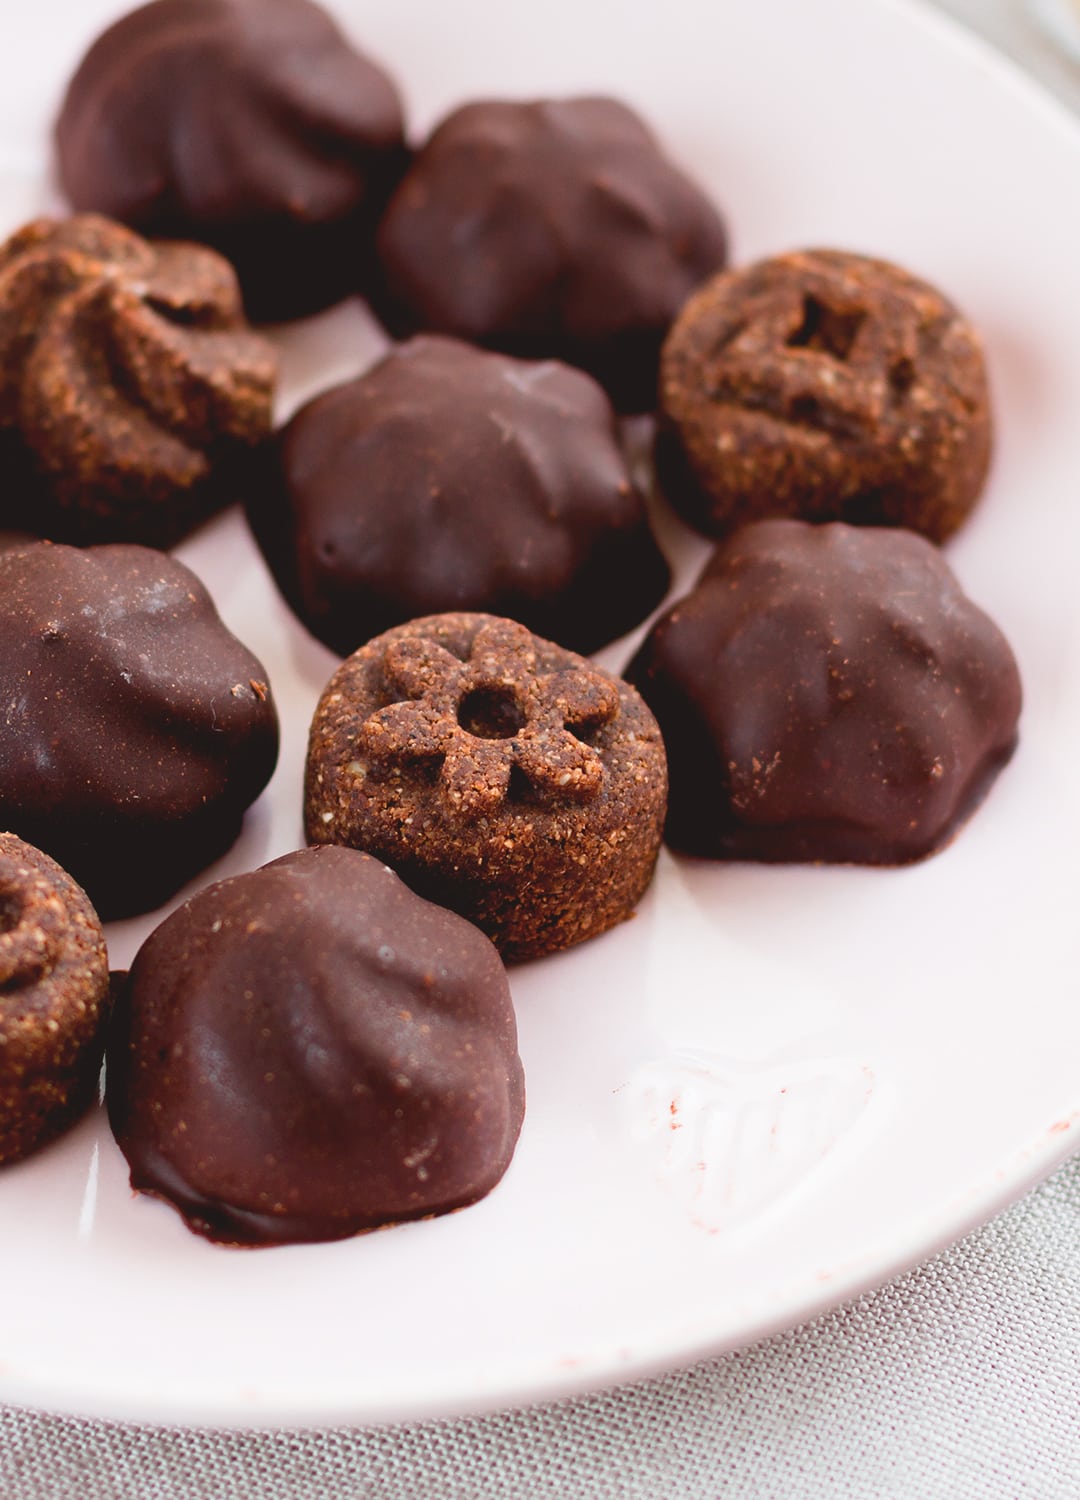 Raw Chocolate Covered Cookies - vegan and delicious, these chocolatey cookies are actually healthy! Great for Valentine's Day or any other day of the week when you're craving something sweet! Store them in the fridge or in the freezer. | thehealthfulideas.com